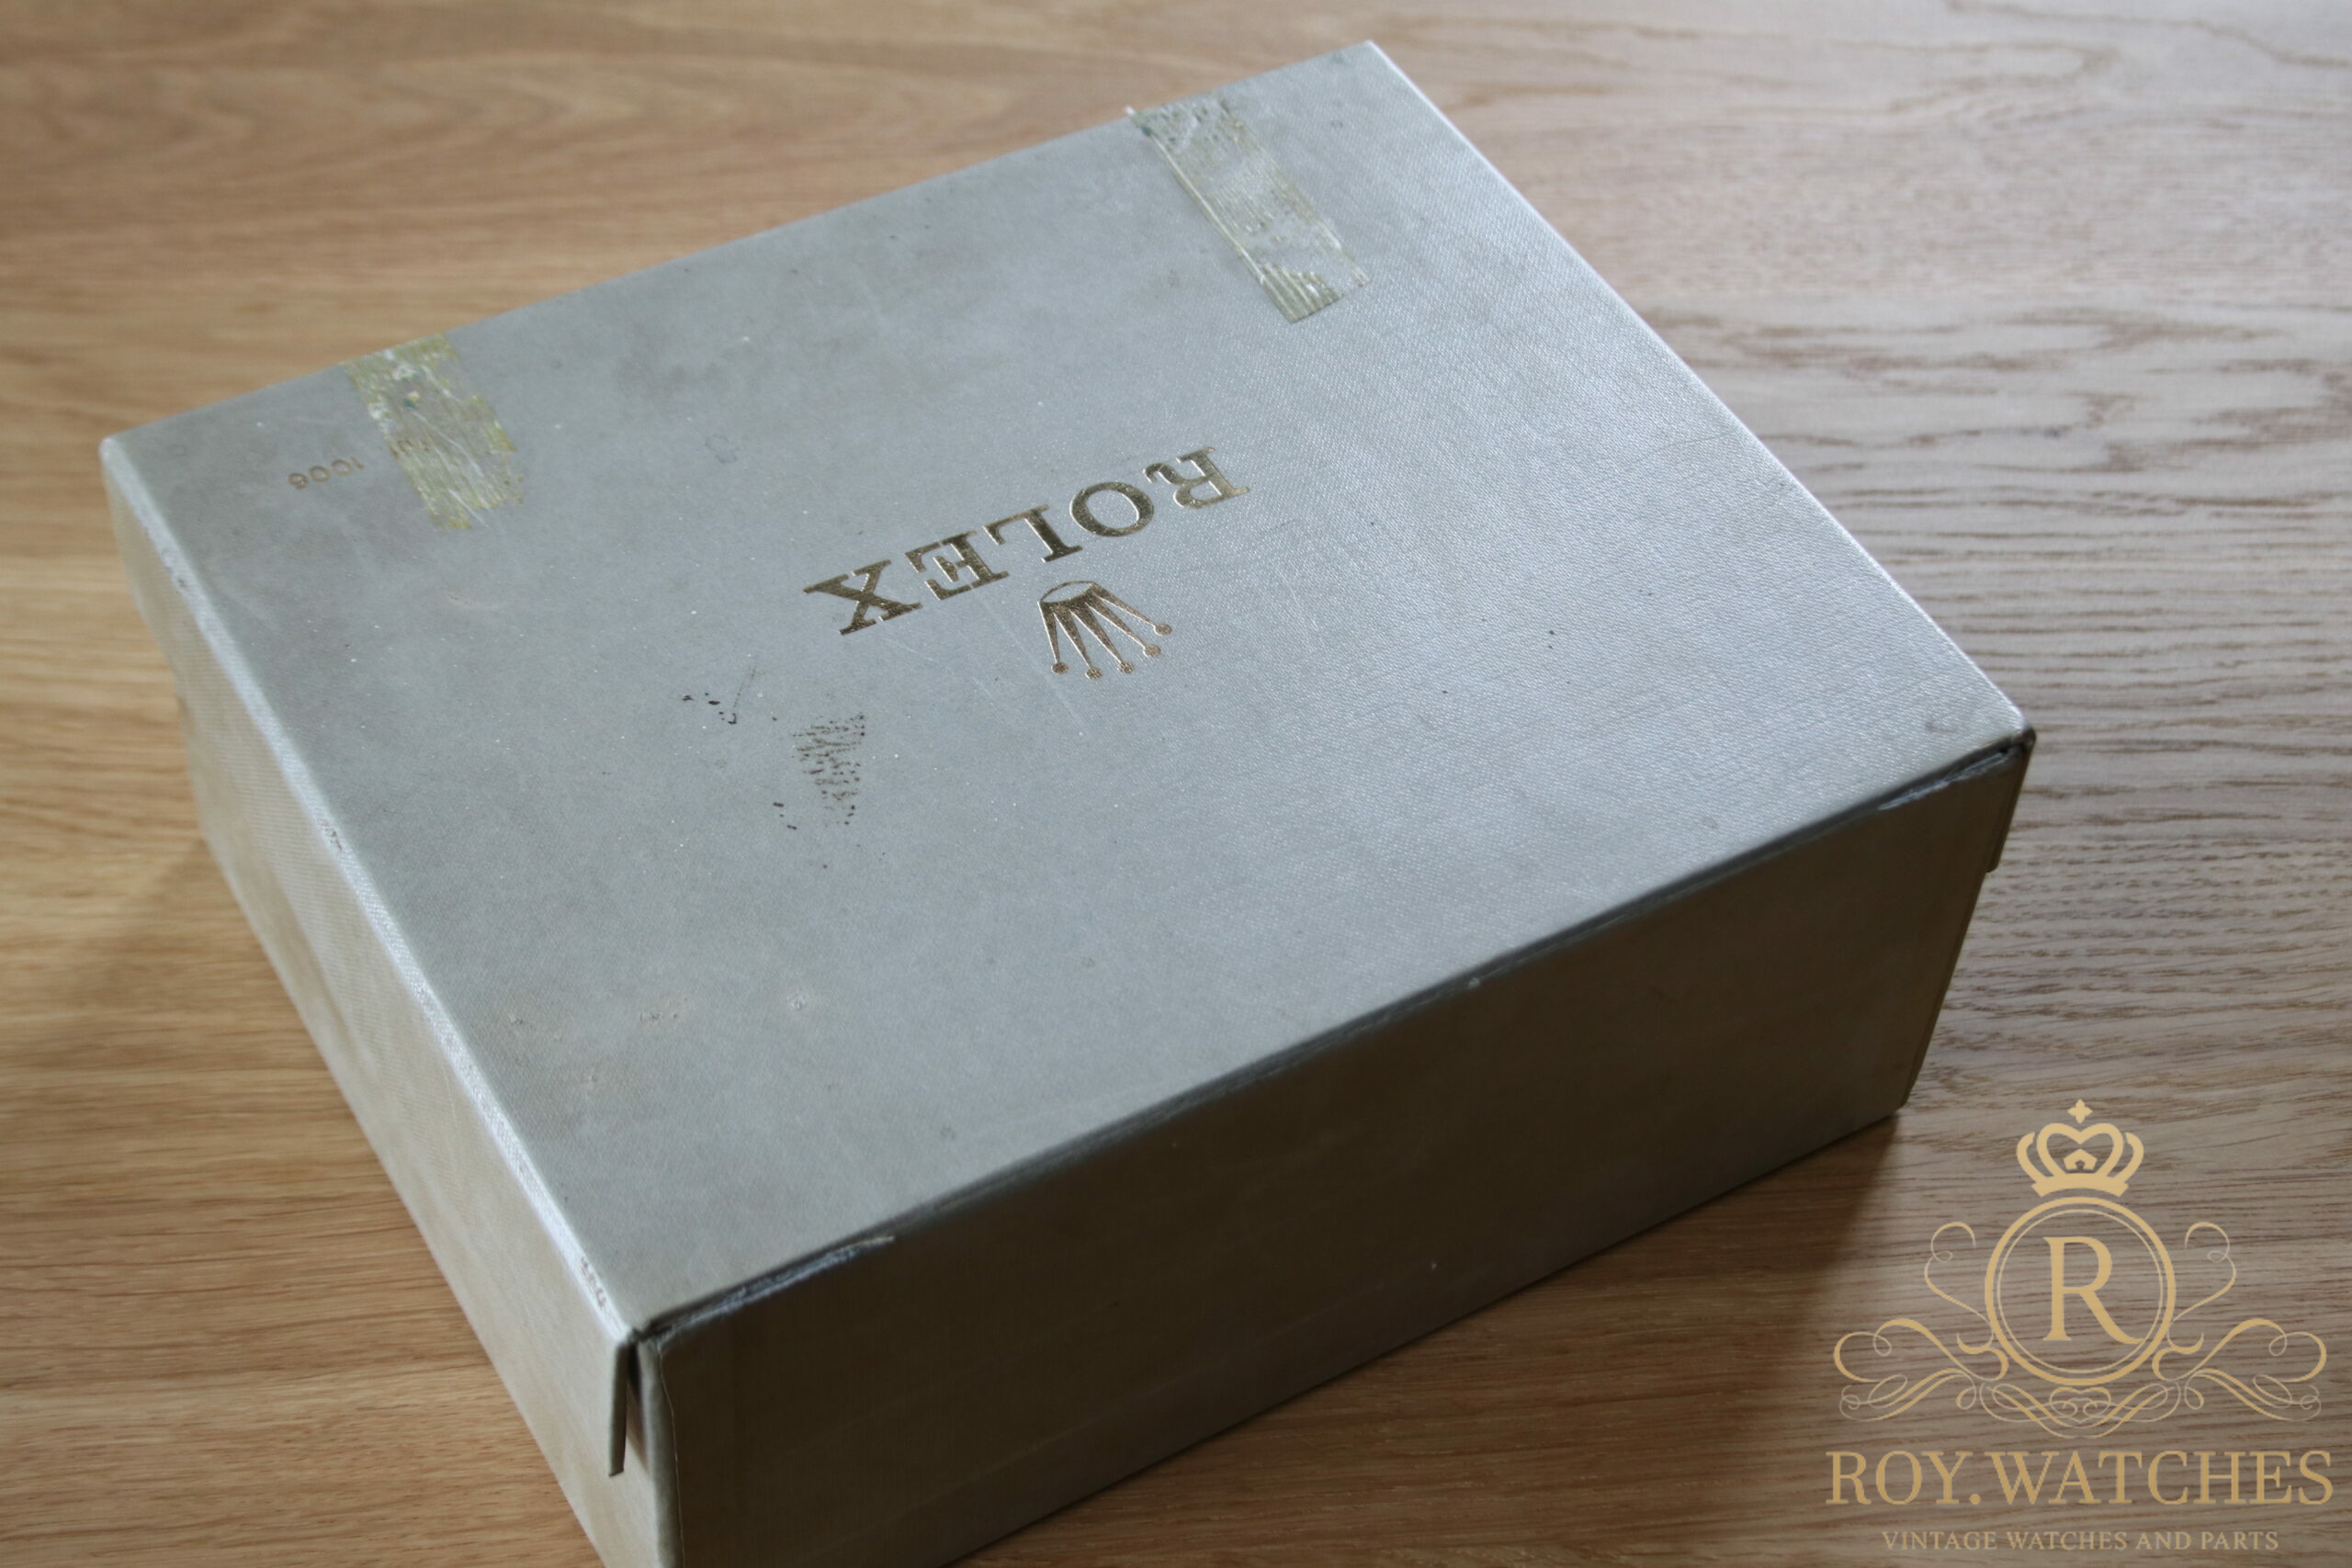 VINTAGE ROLEX TOOL 1006 WITH BOX - VERY RARE - Roy Watches | Vintage ...